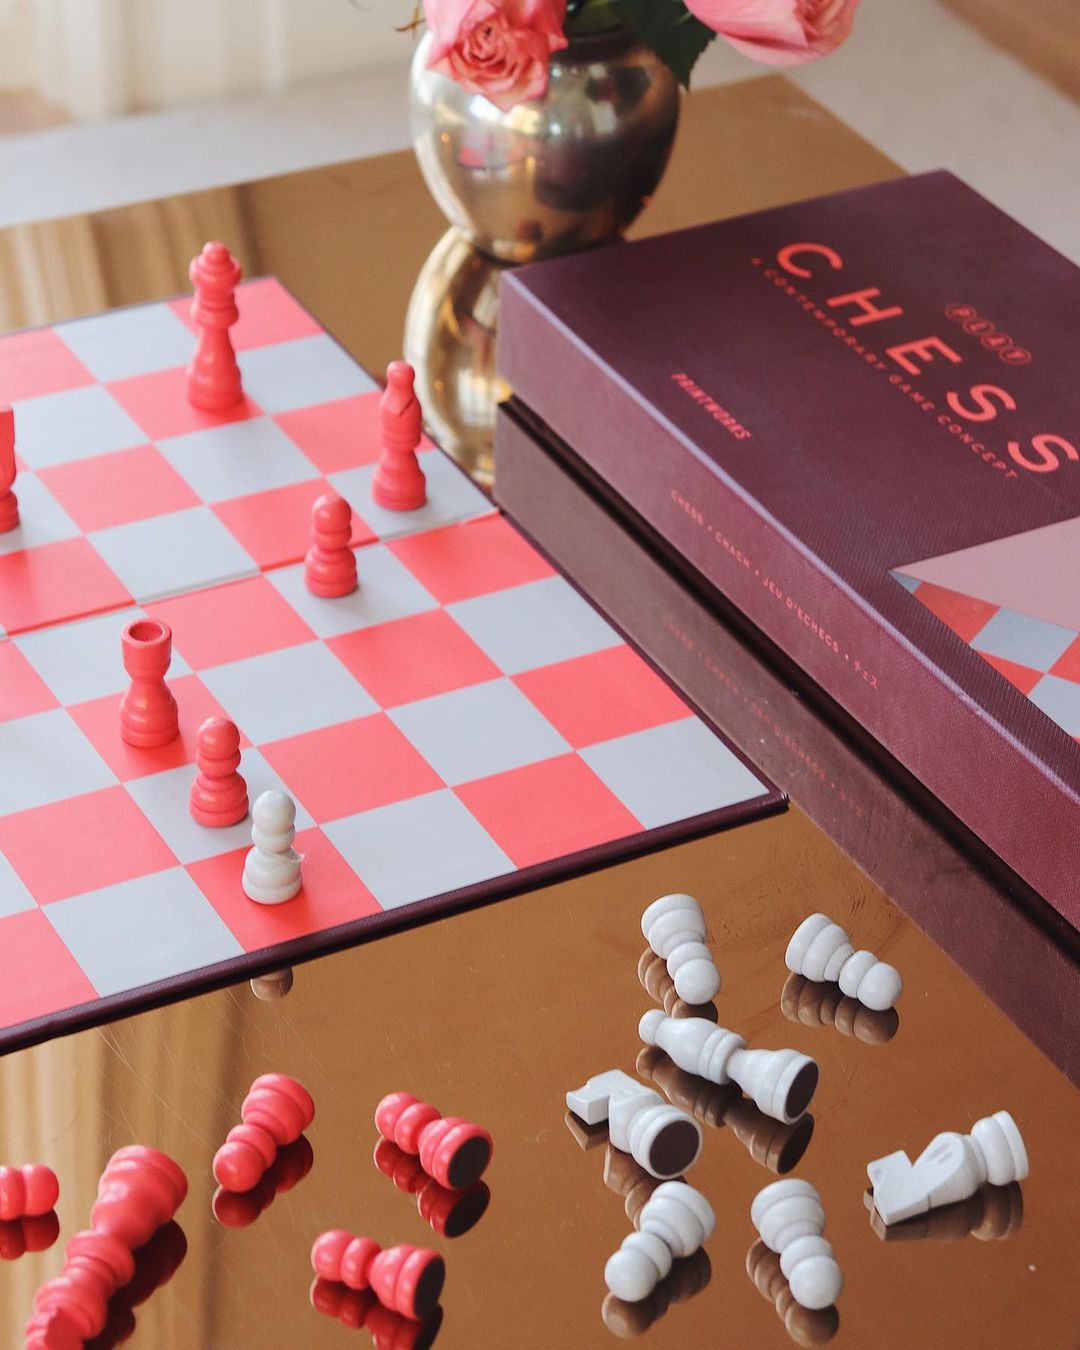 Colorful chess game from Printworks.